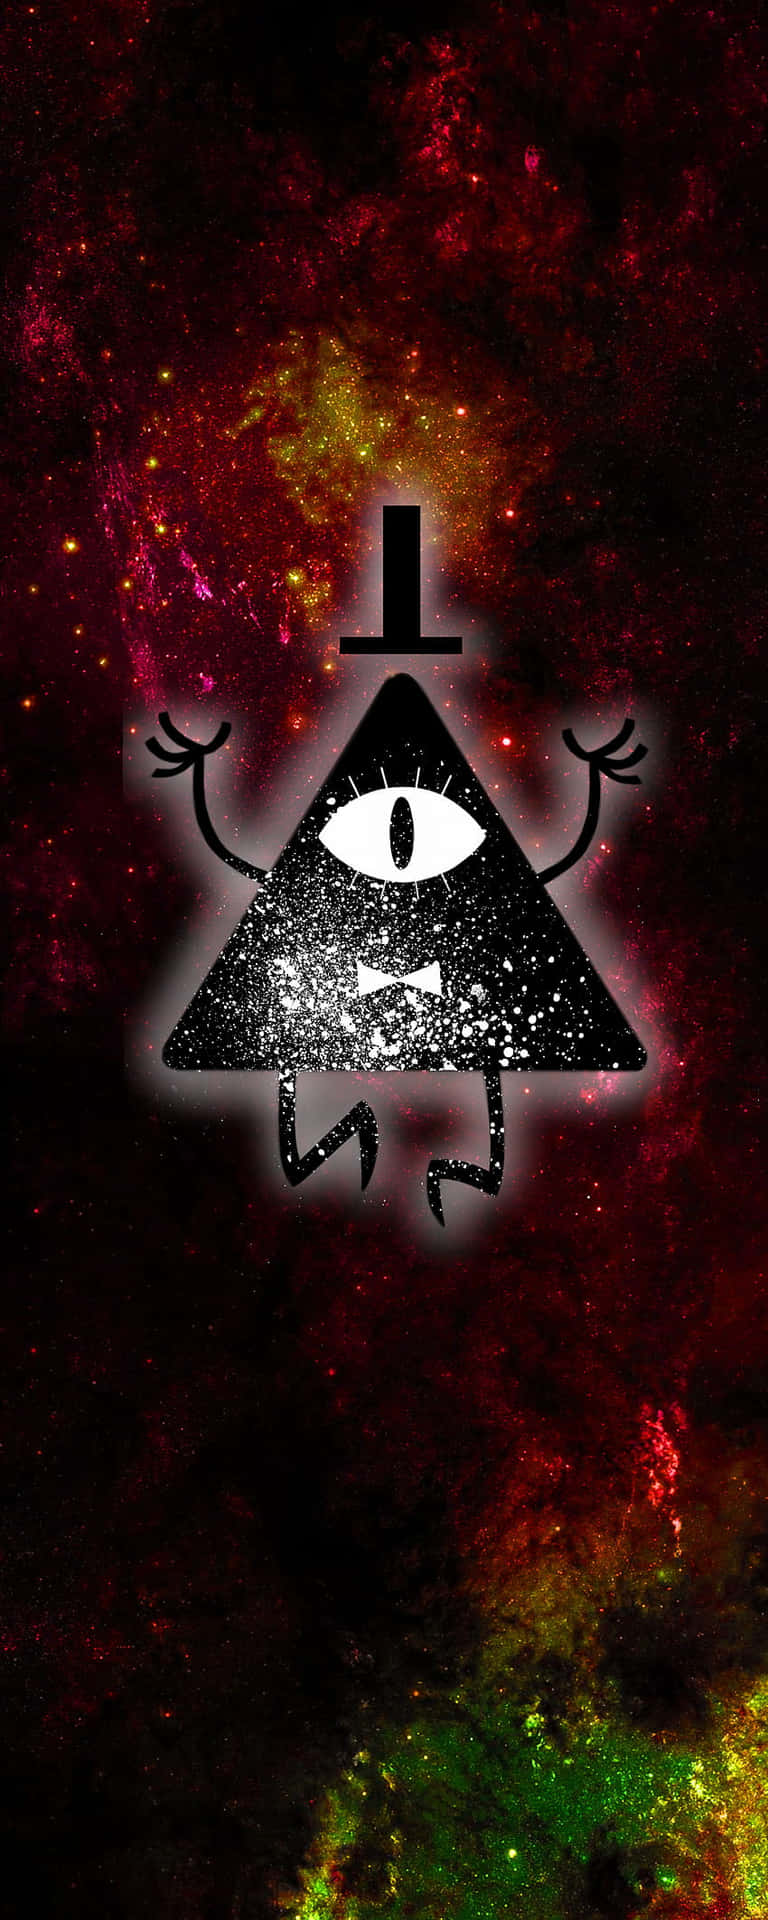 The Sinister Bill Cipher